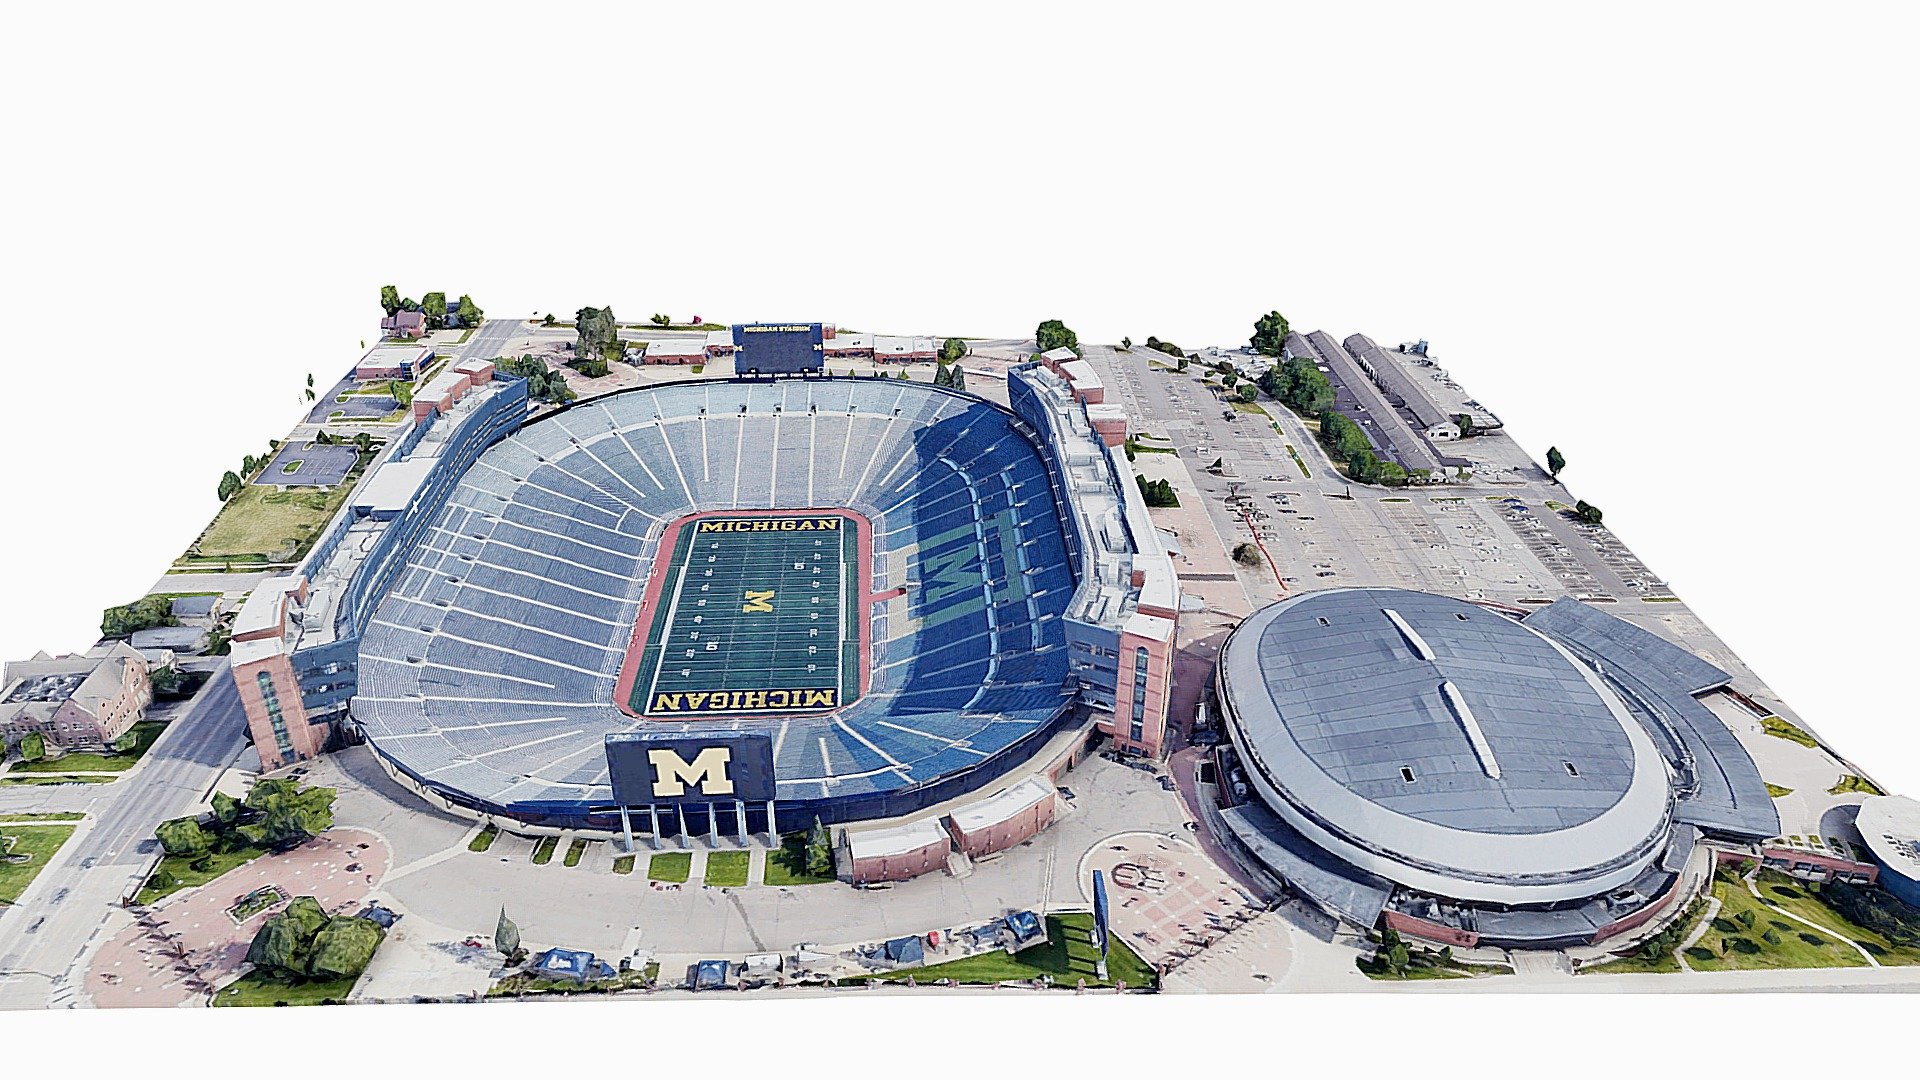 Realistic 3d model 1:1
Michigan Stadium, nicknamed The Big House, is the football stadium for the University of Michigan in Ann Arbor, Michigan. It is the largest stadium in the United States and the Western Hemisphere, the third largest stadium in the world, and the 34th largest sports venue in the world. Its official capacity is 107,601,but has hosted crowds in excess of 115,000 3d model